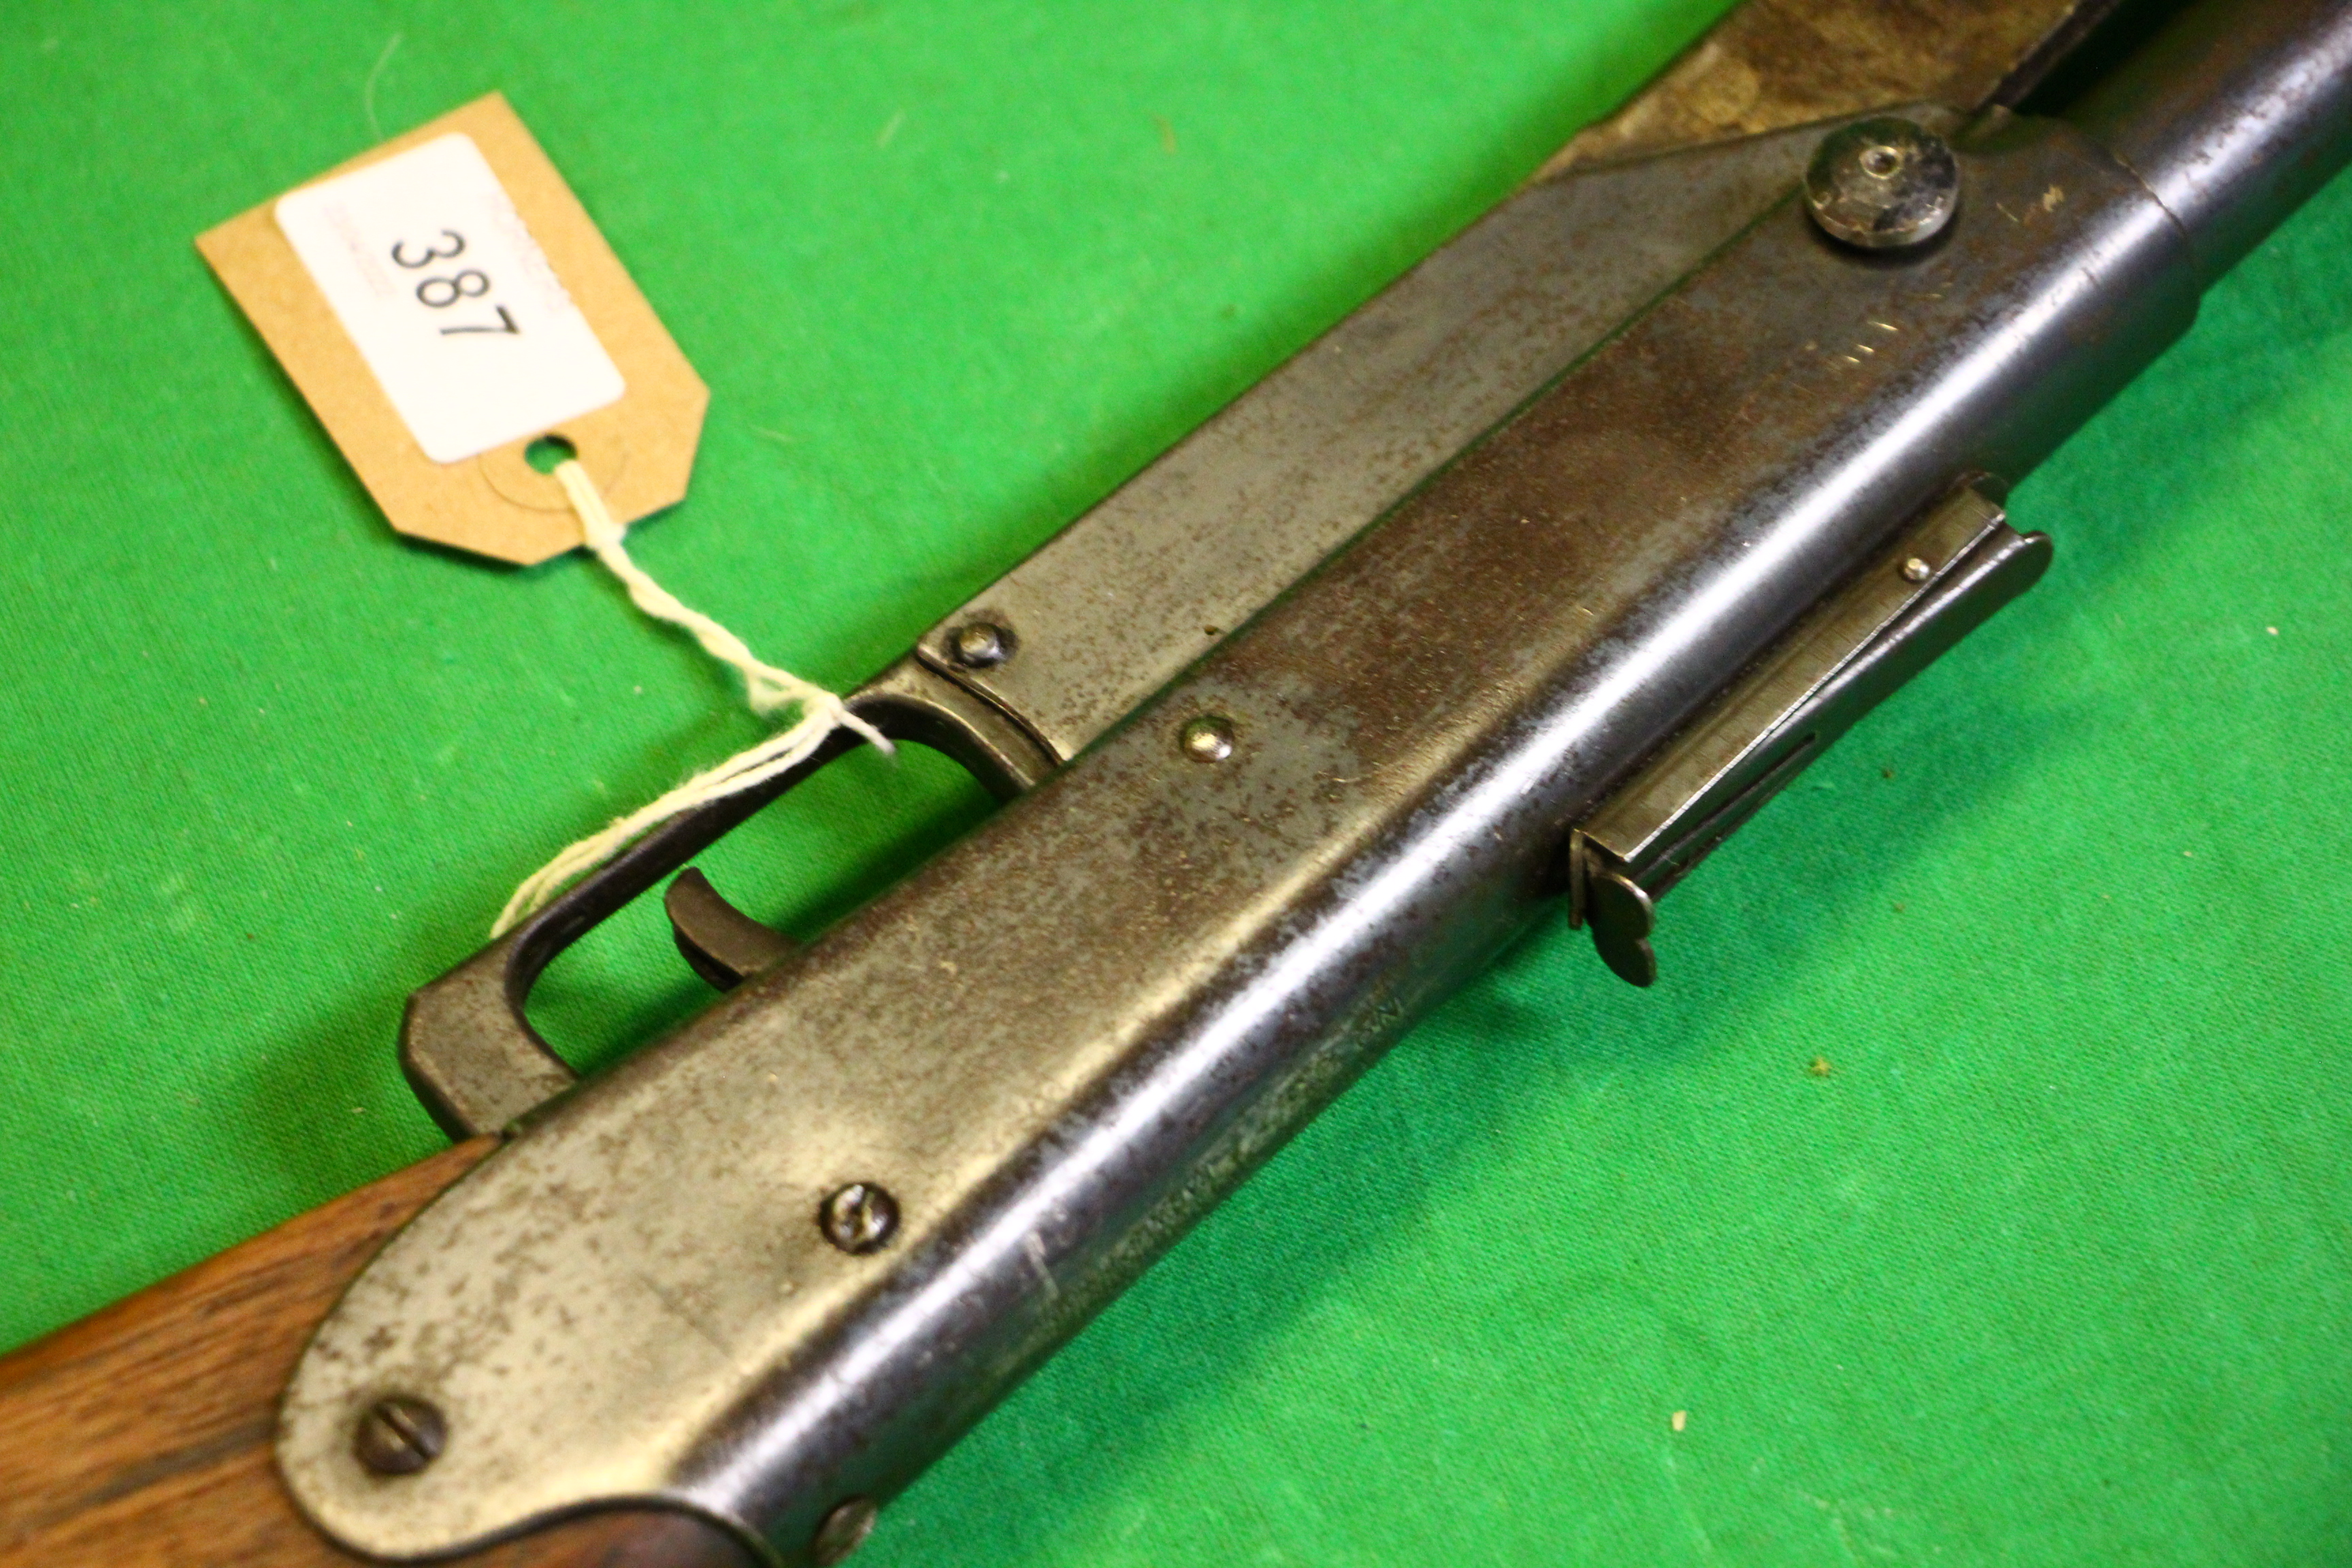 A DAISY MODEL 25 PUMP ACTION AIR GUN - (ALL GUNS TO BE INSPECTED AND SERVICED BY QUALIFIED GUNSMITH - Image 7 of 8